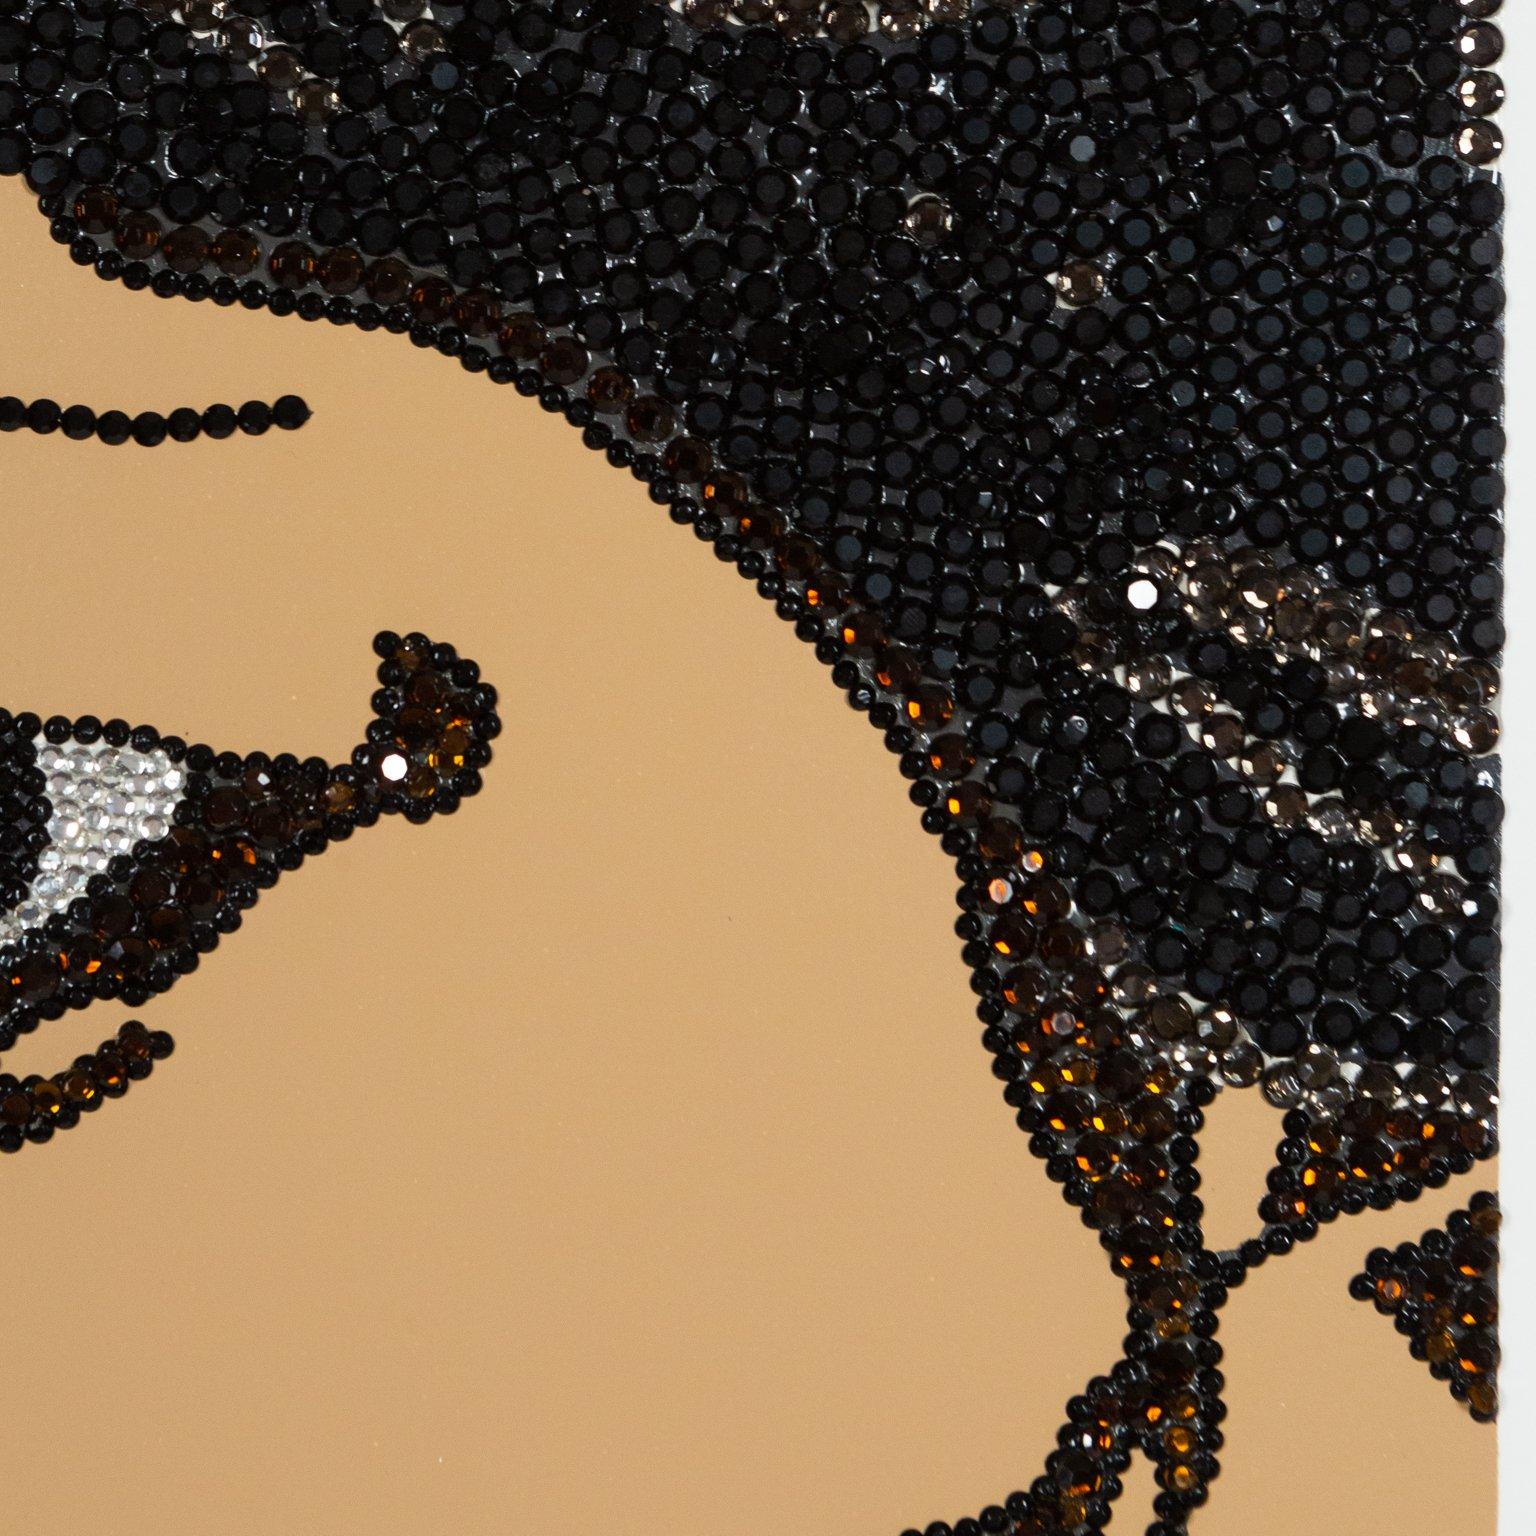 Mickalene Thomas (b.1971) is an American artist exploring the intersection of popular culture and art history, through a contemporary Black female gaze. As an openly gay Black woman, sexuality and race are essential themes in Thomas'